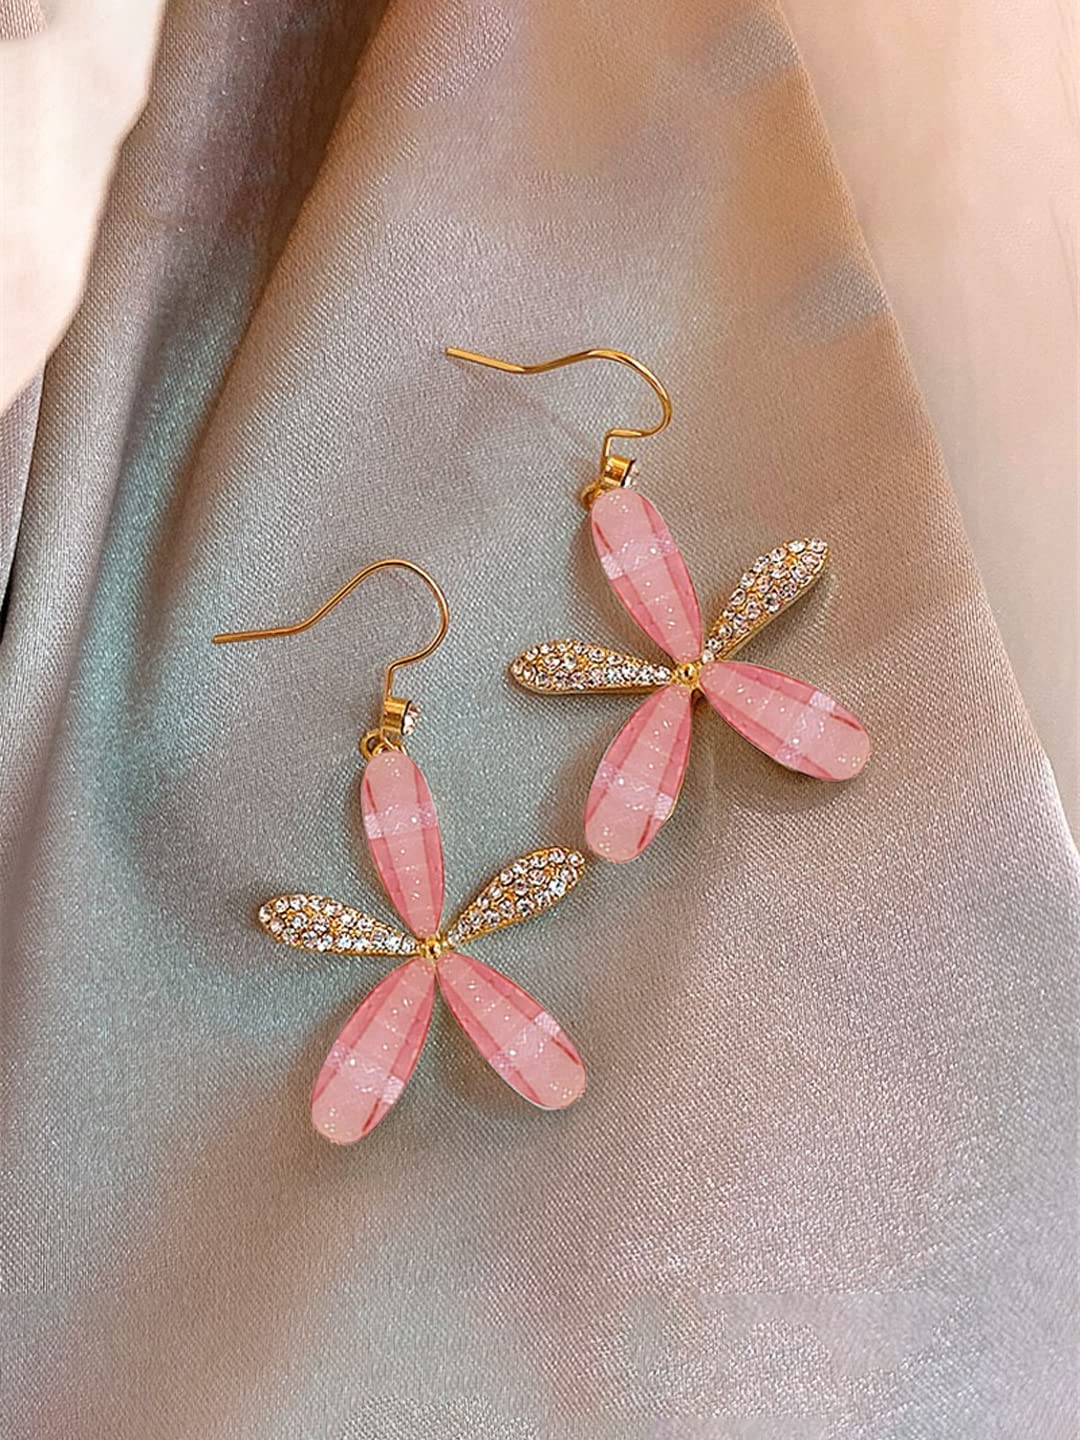 Chic Crystal Dangle Earrings For Women Fashionable Citrus, Rose Quartz, And  Gravel Charms De Evangeline Hooks Perfect Birthday Gift From Mkny, $0.71 |  DHgate.Com